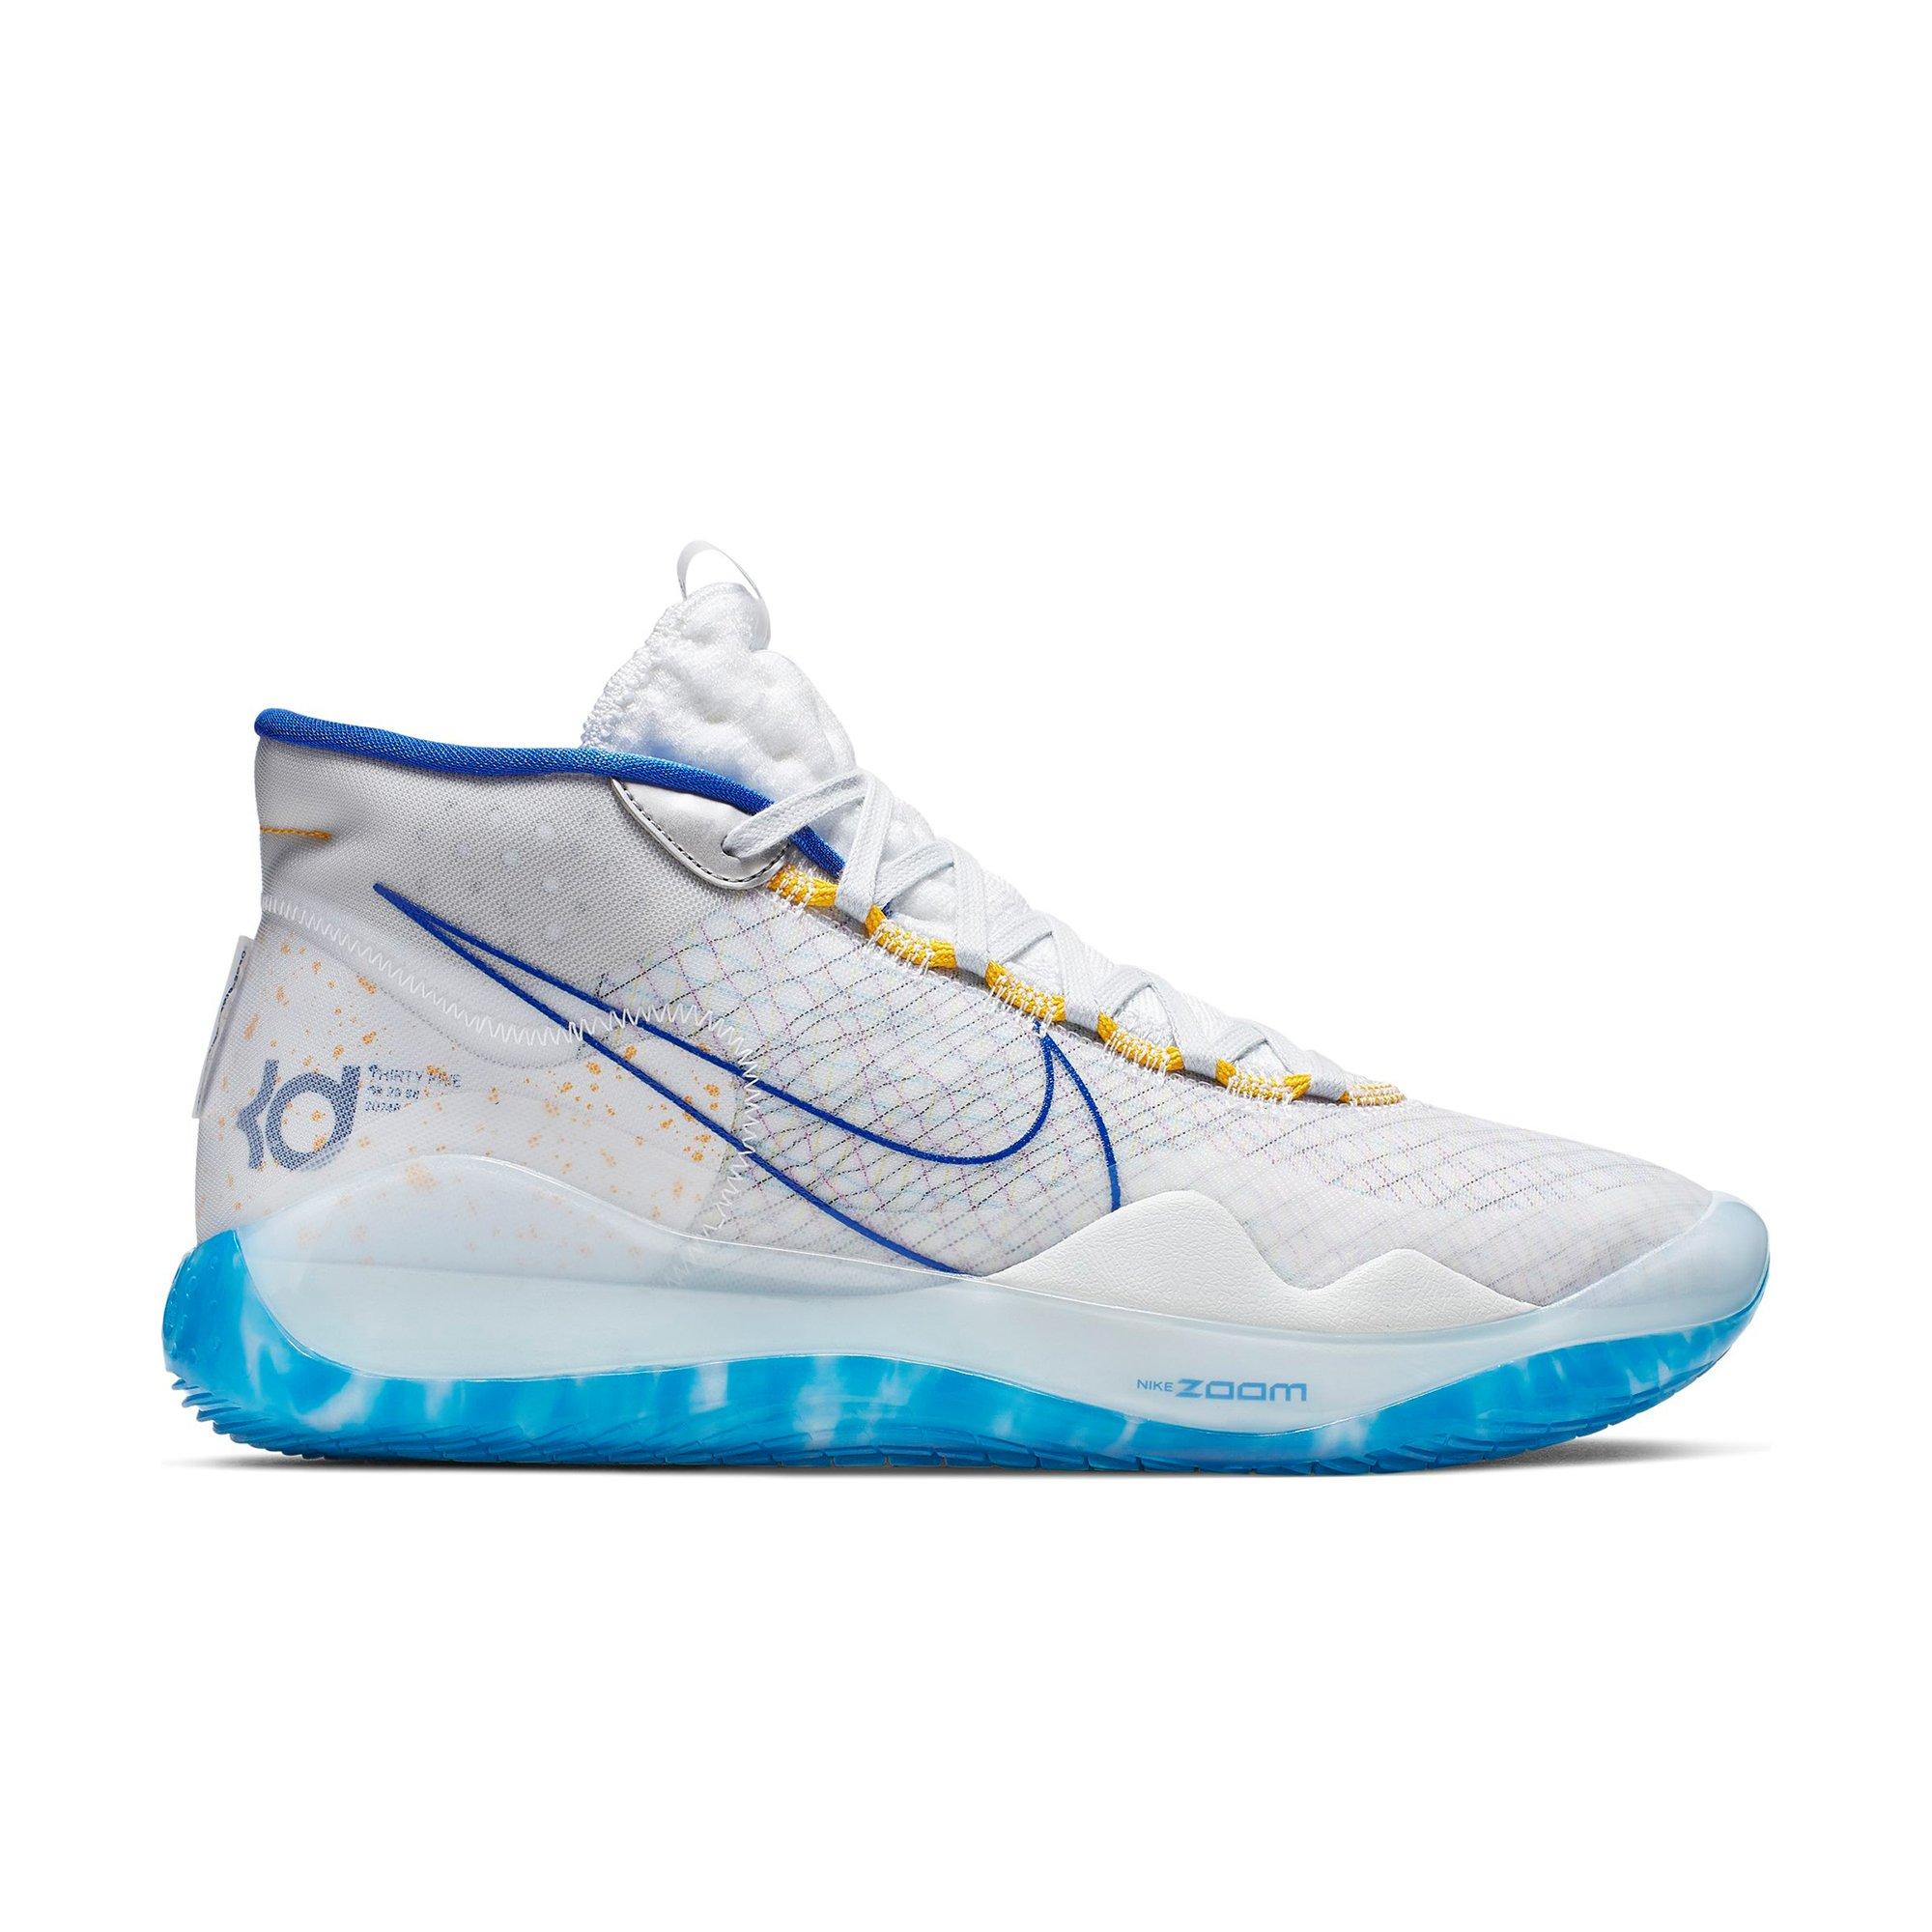 kd shoes white and blue